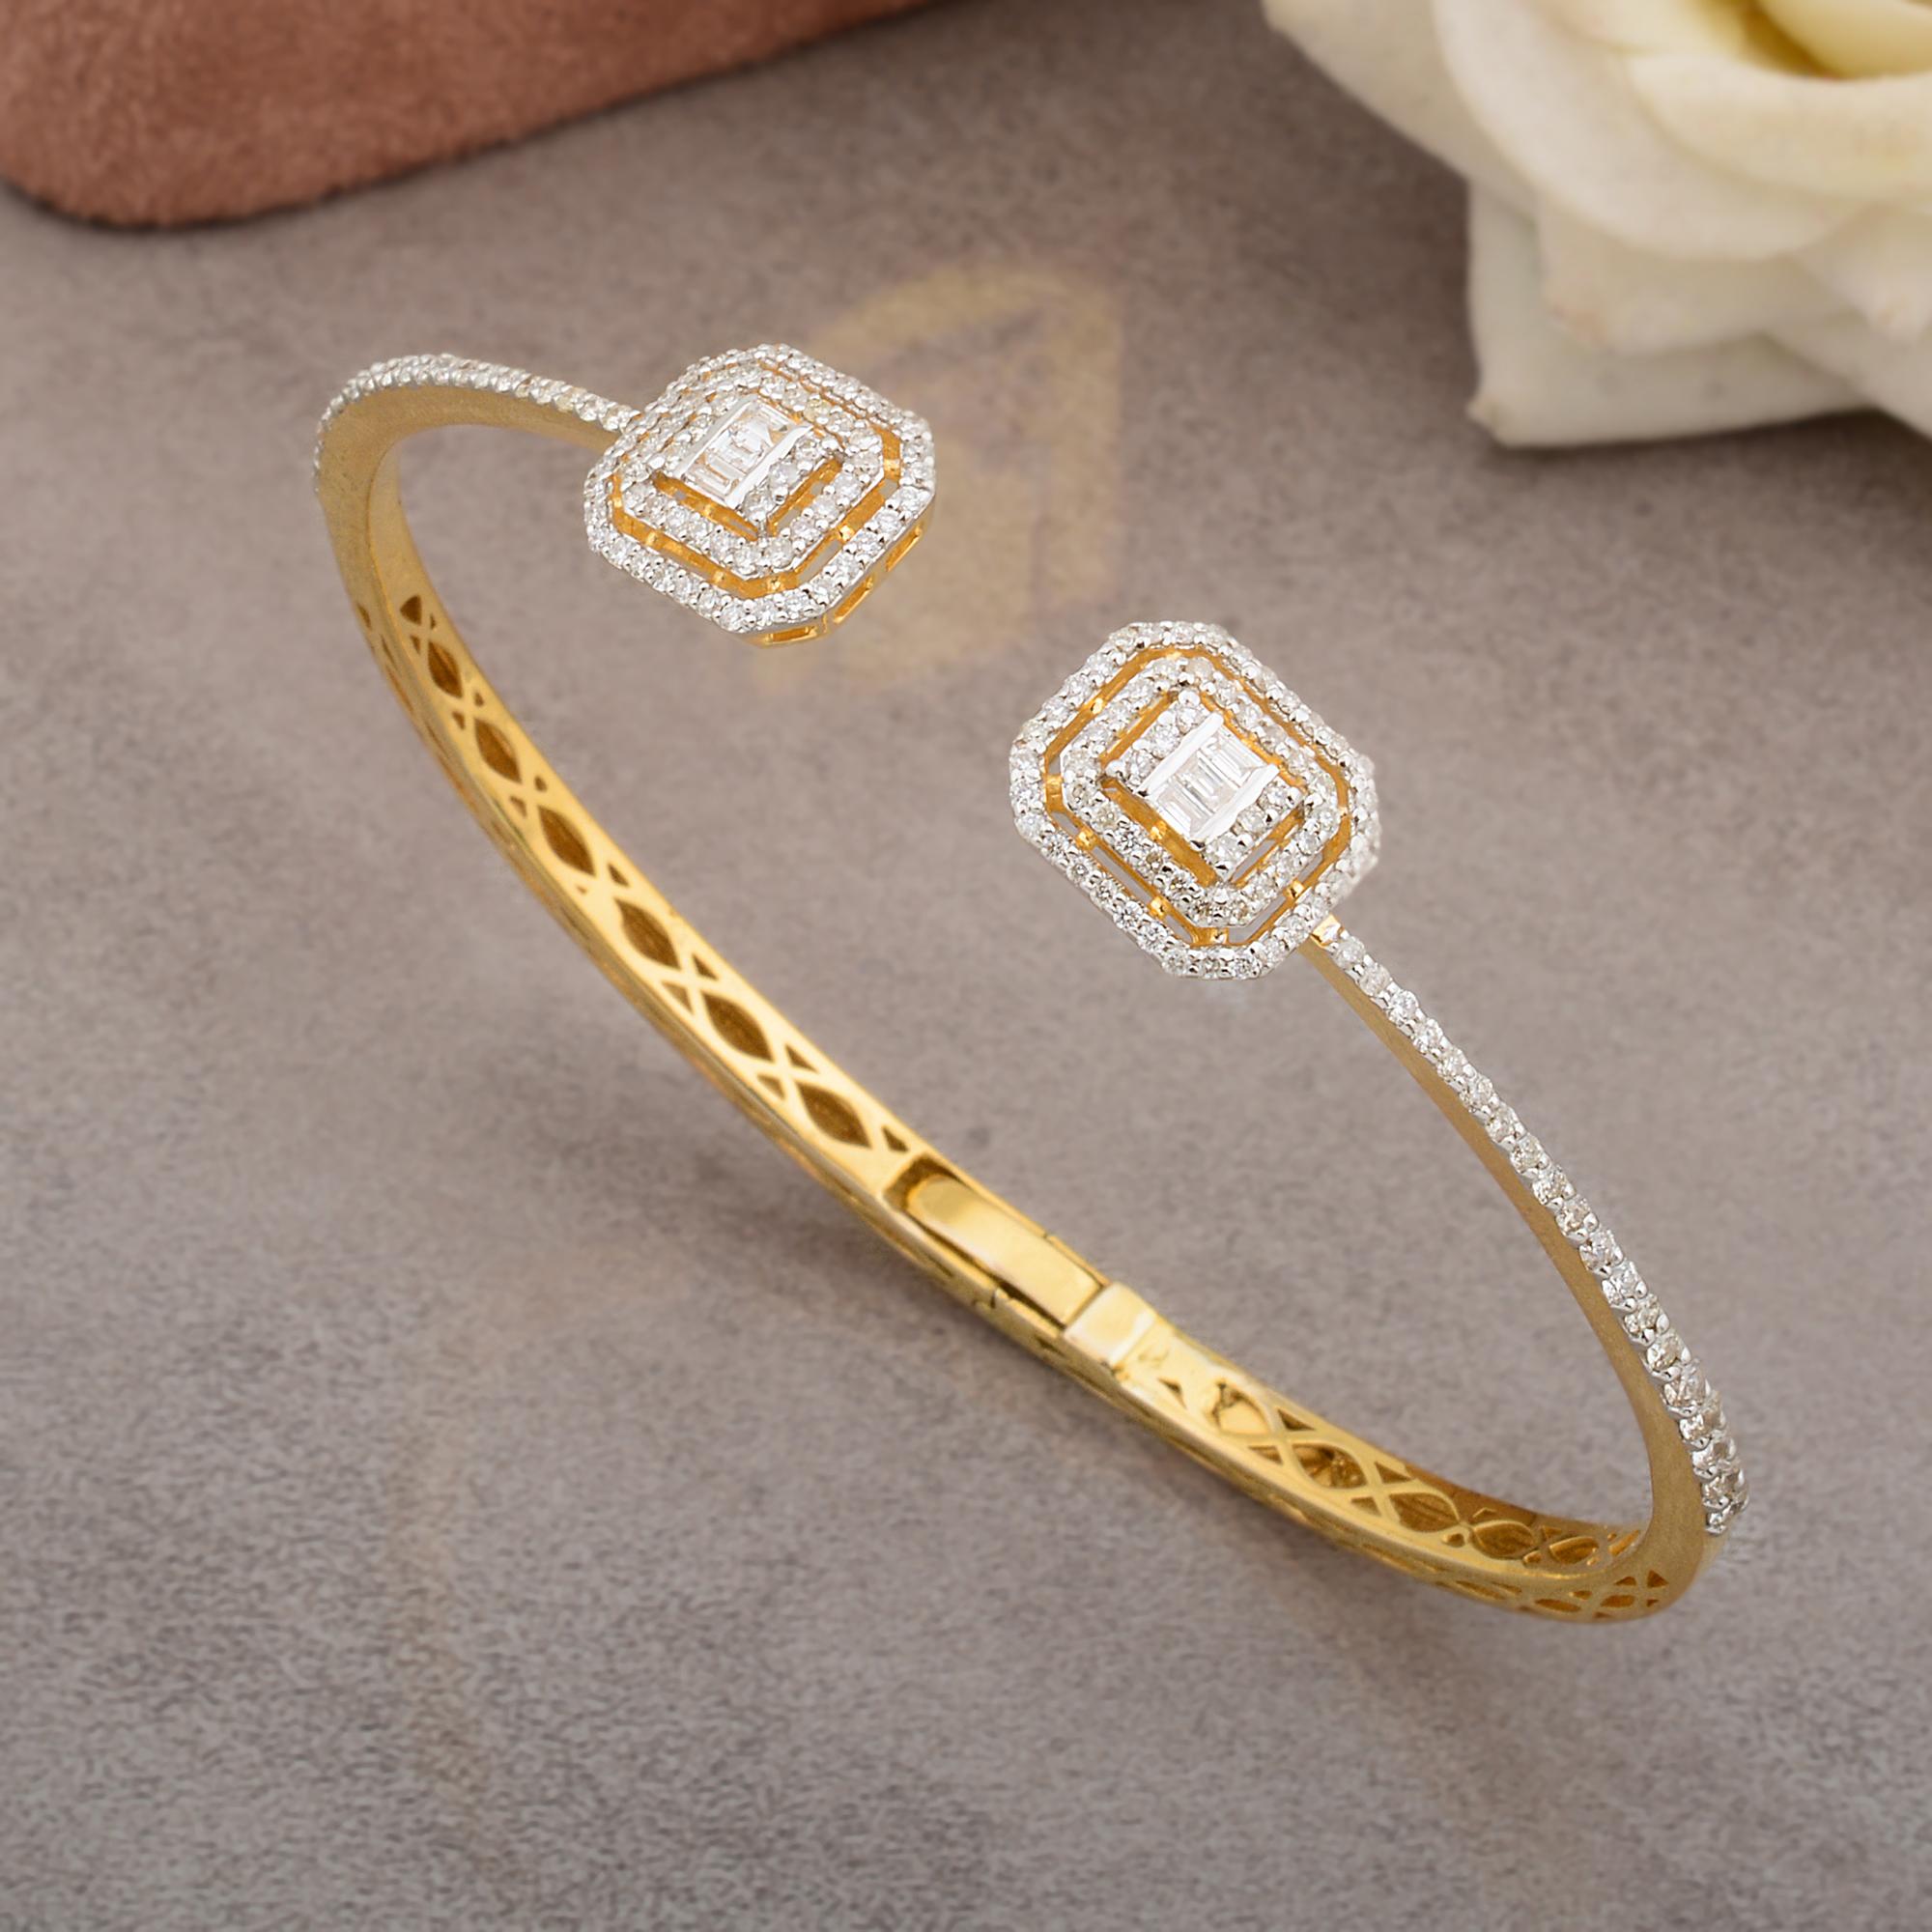 This Dainty Diamond Bracelet with 1.2 ct. Genuine Diamonds is a promise of perfection and purity. This bracelet is set in 10k Solid Yellow Gold. You can choose this bracelet in 10k Rose Gold/Yellow Gold/White Gold.

This is a perfect Gift for Mom,